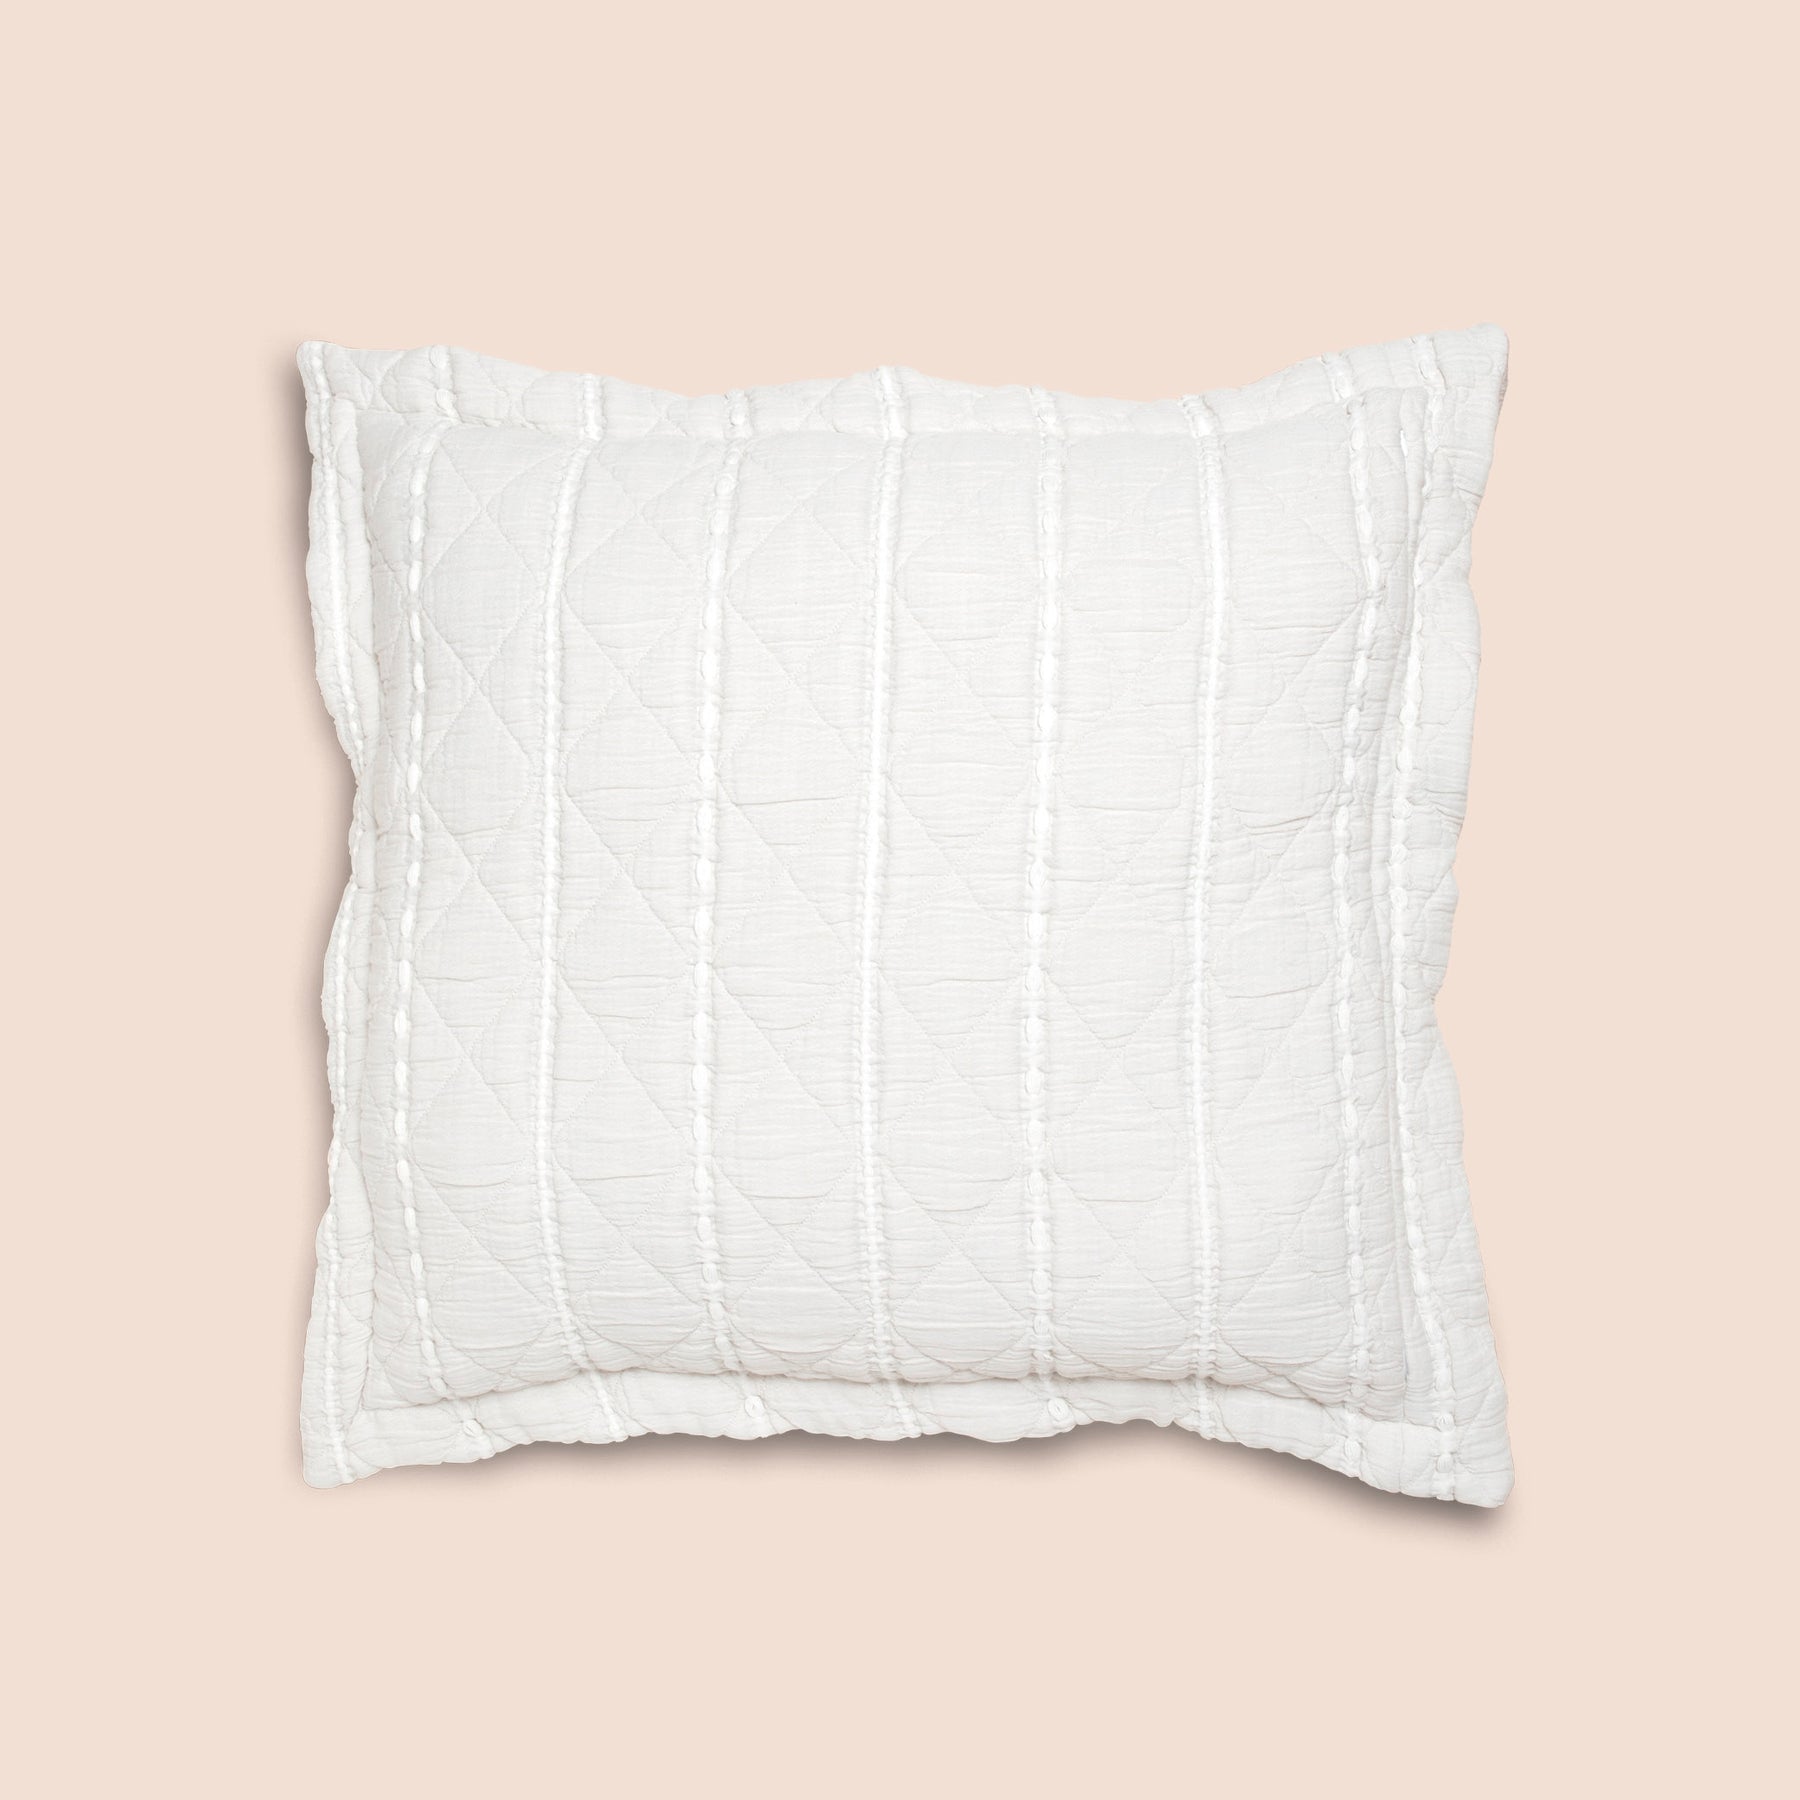 Image of the all-white side of the Heritage Pillow Sham on a Euro pillow with a light pink background